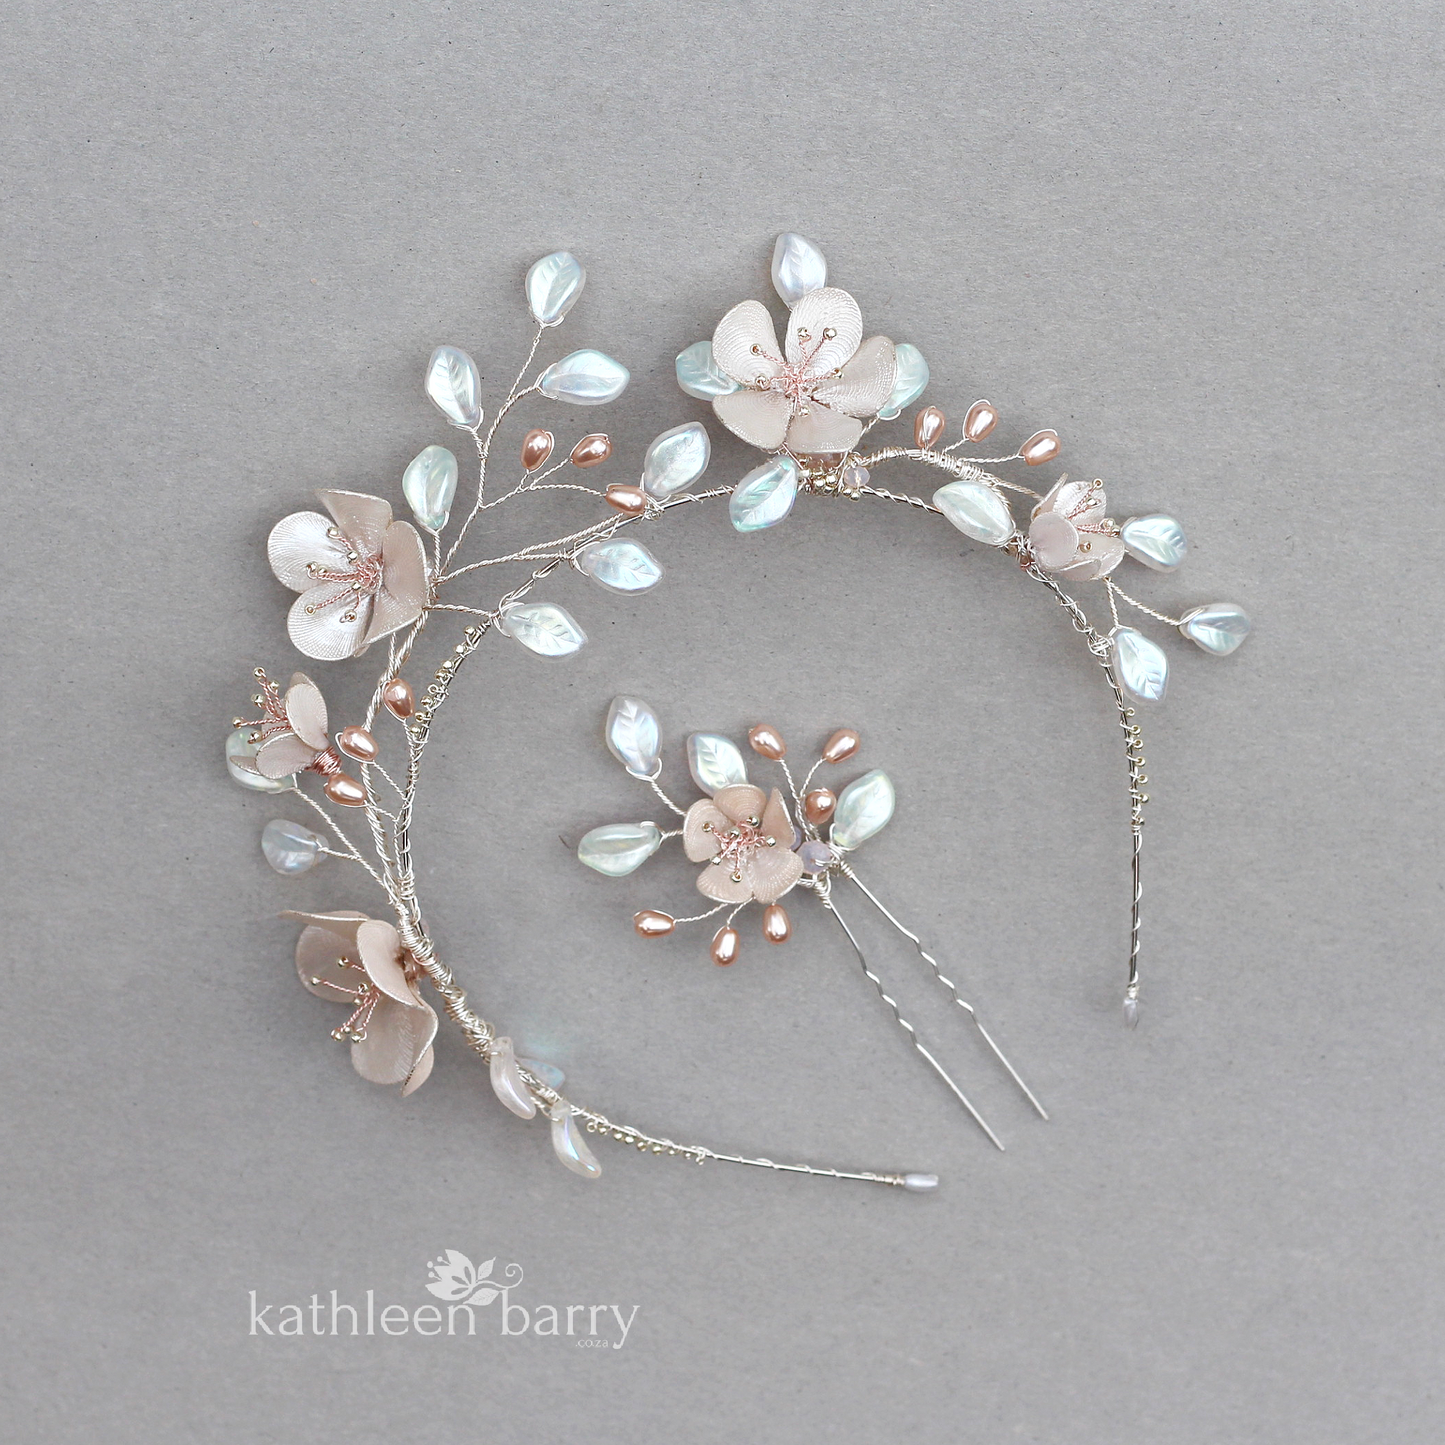 Bespoke blossom crown - assorted colors available